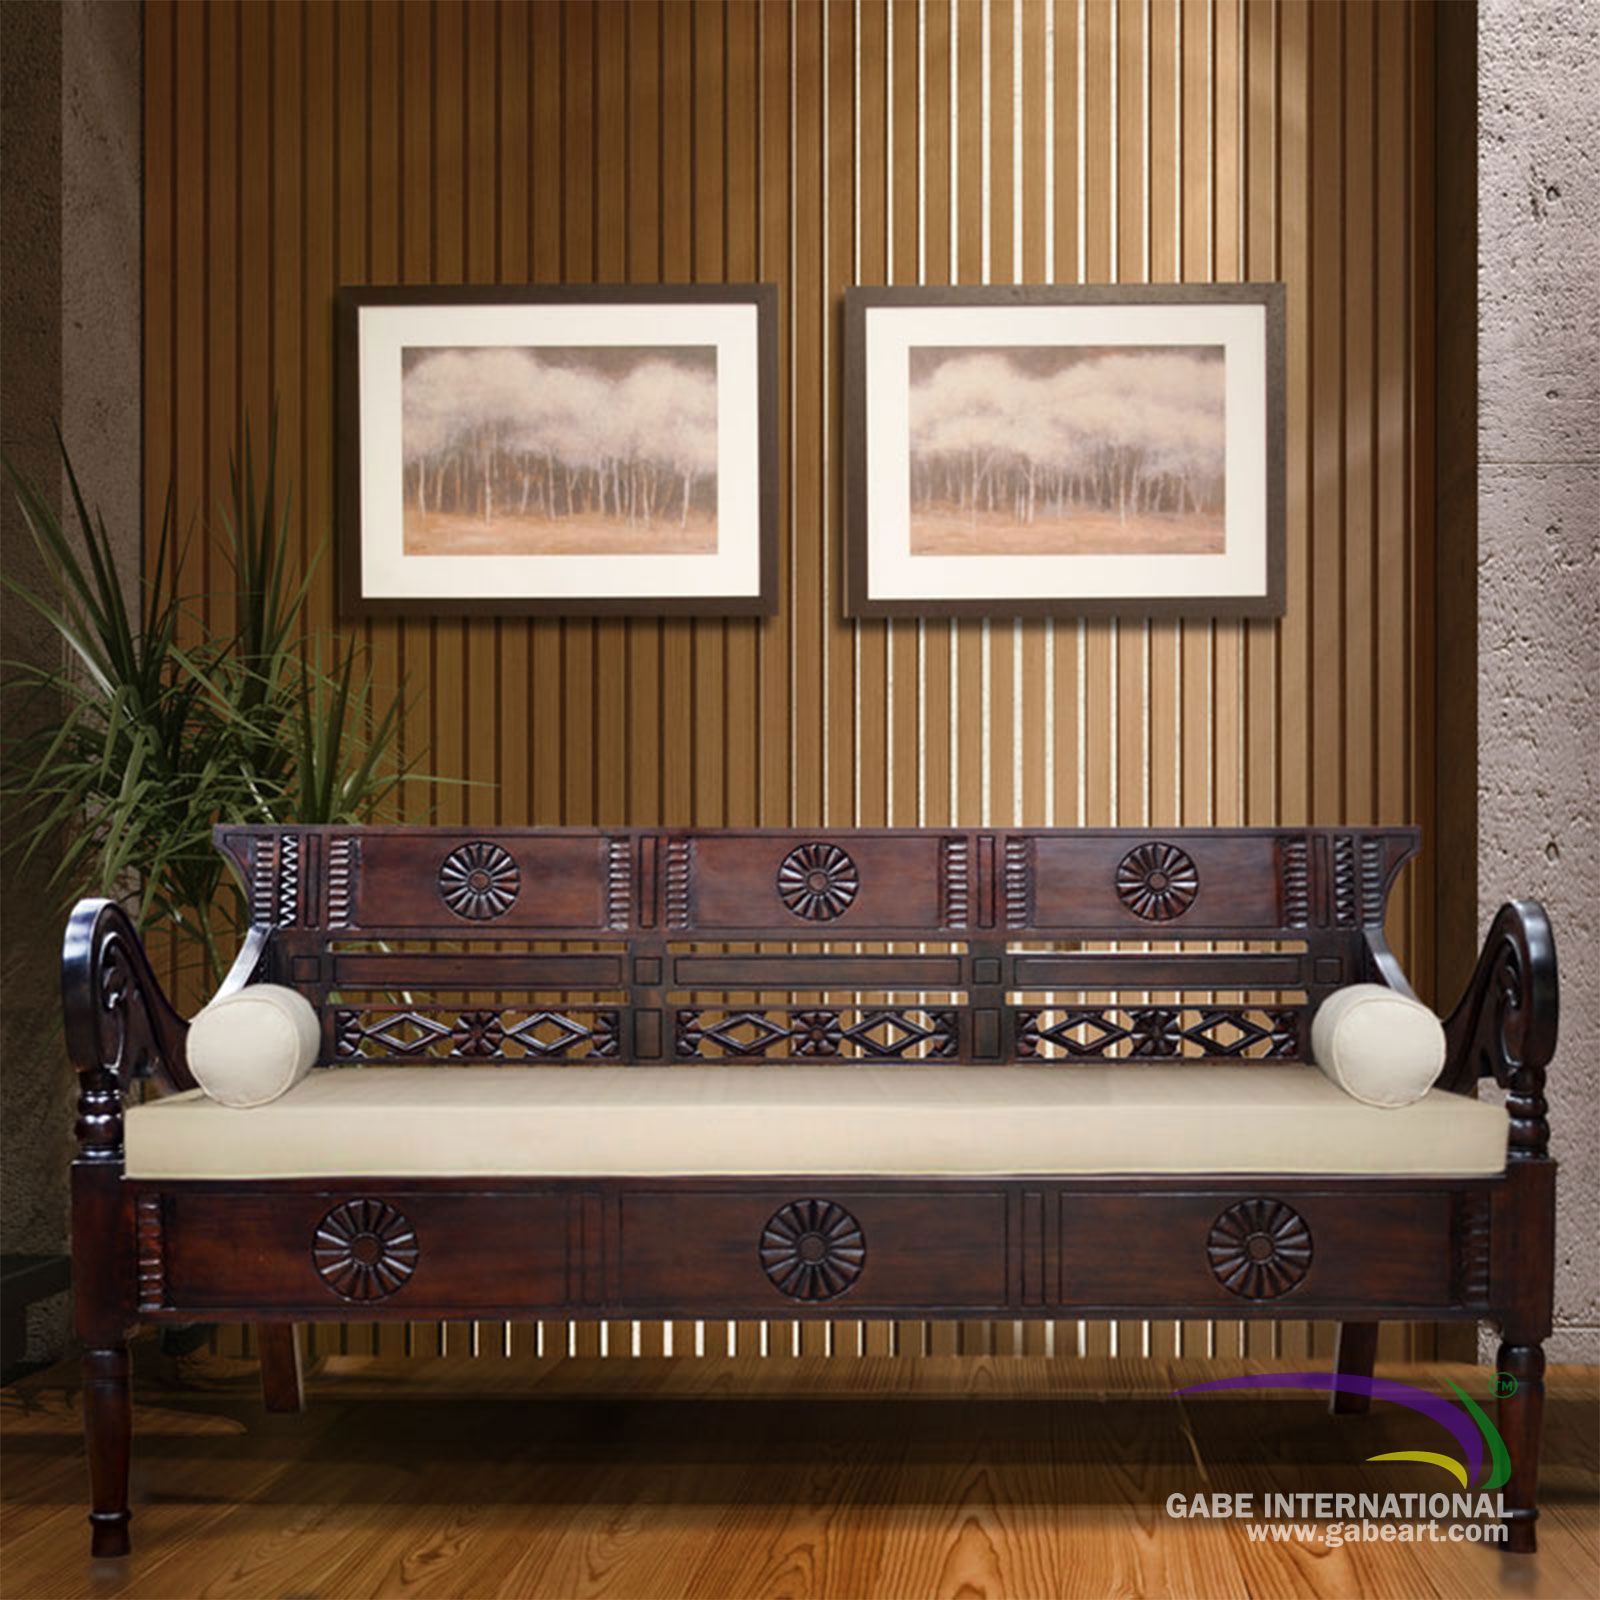 Guigame teak bench and cushion in livingroom